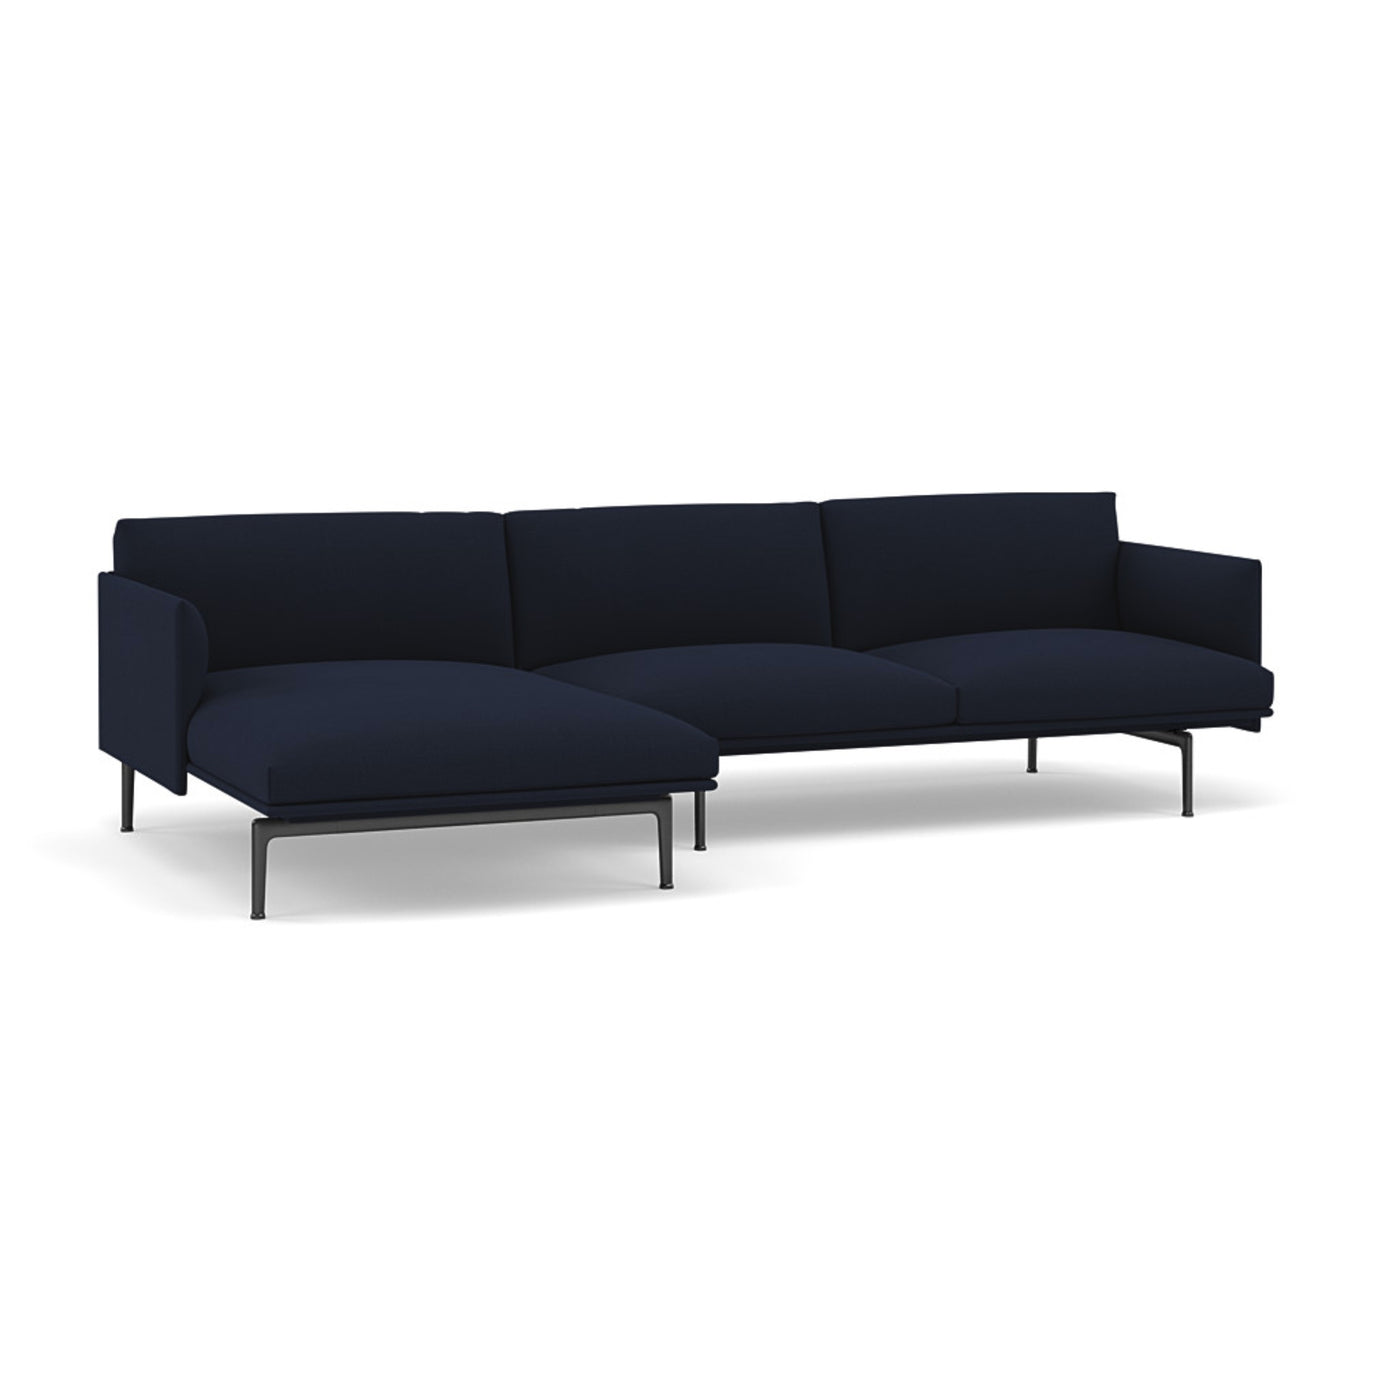 Muuto Outline Chaise Longue sofa. Made to order from someday designs. #colour_vidar-554